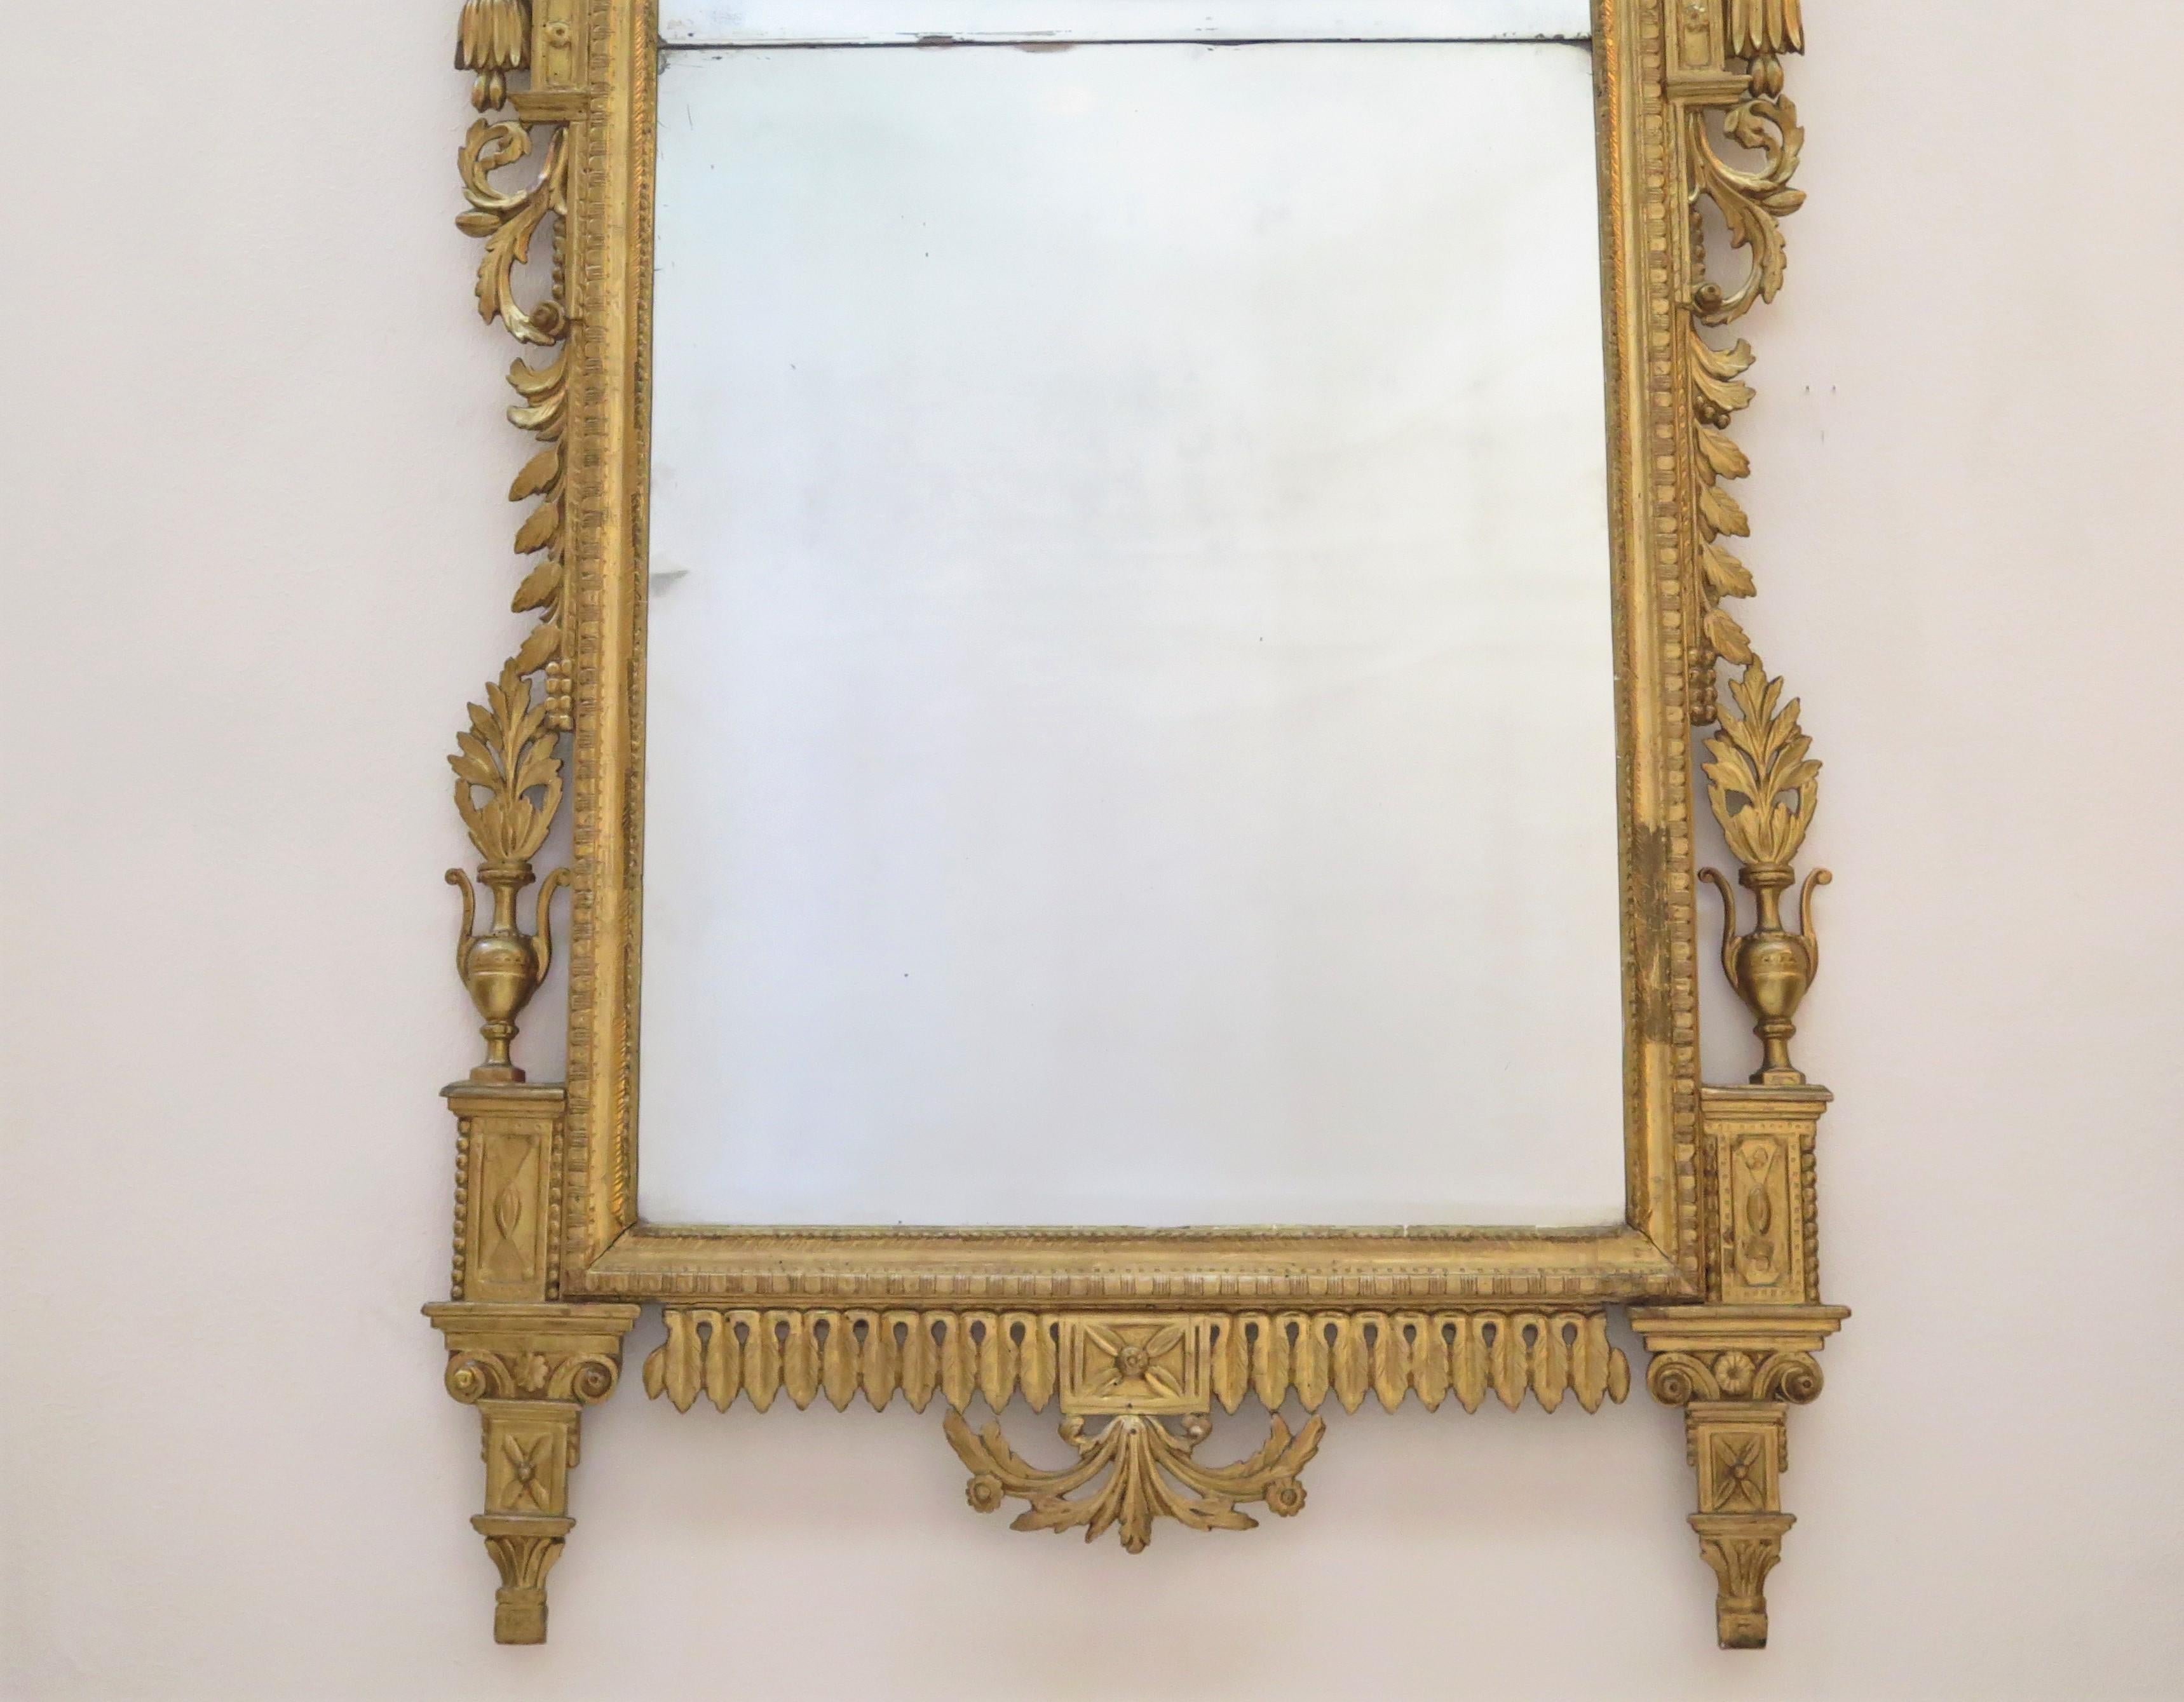 18th Century Italian (Tuscan) Neoclassical Giltwood Pier Glass For Sale 3